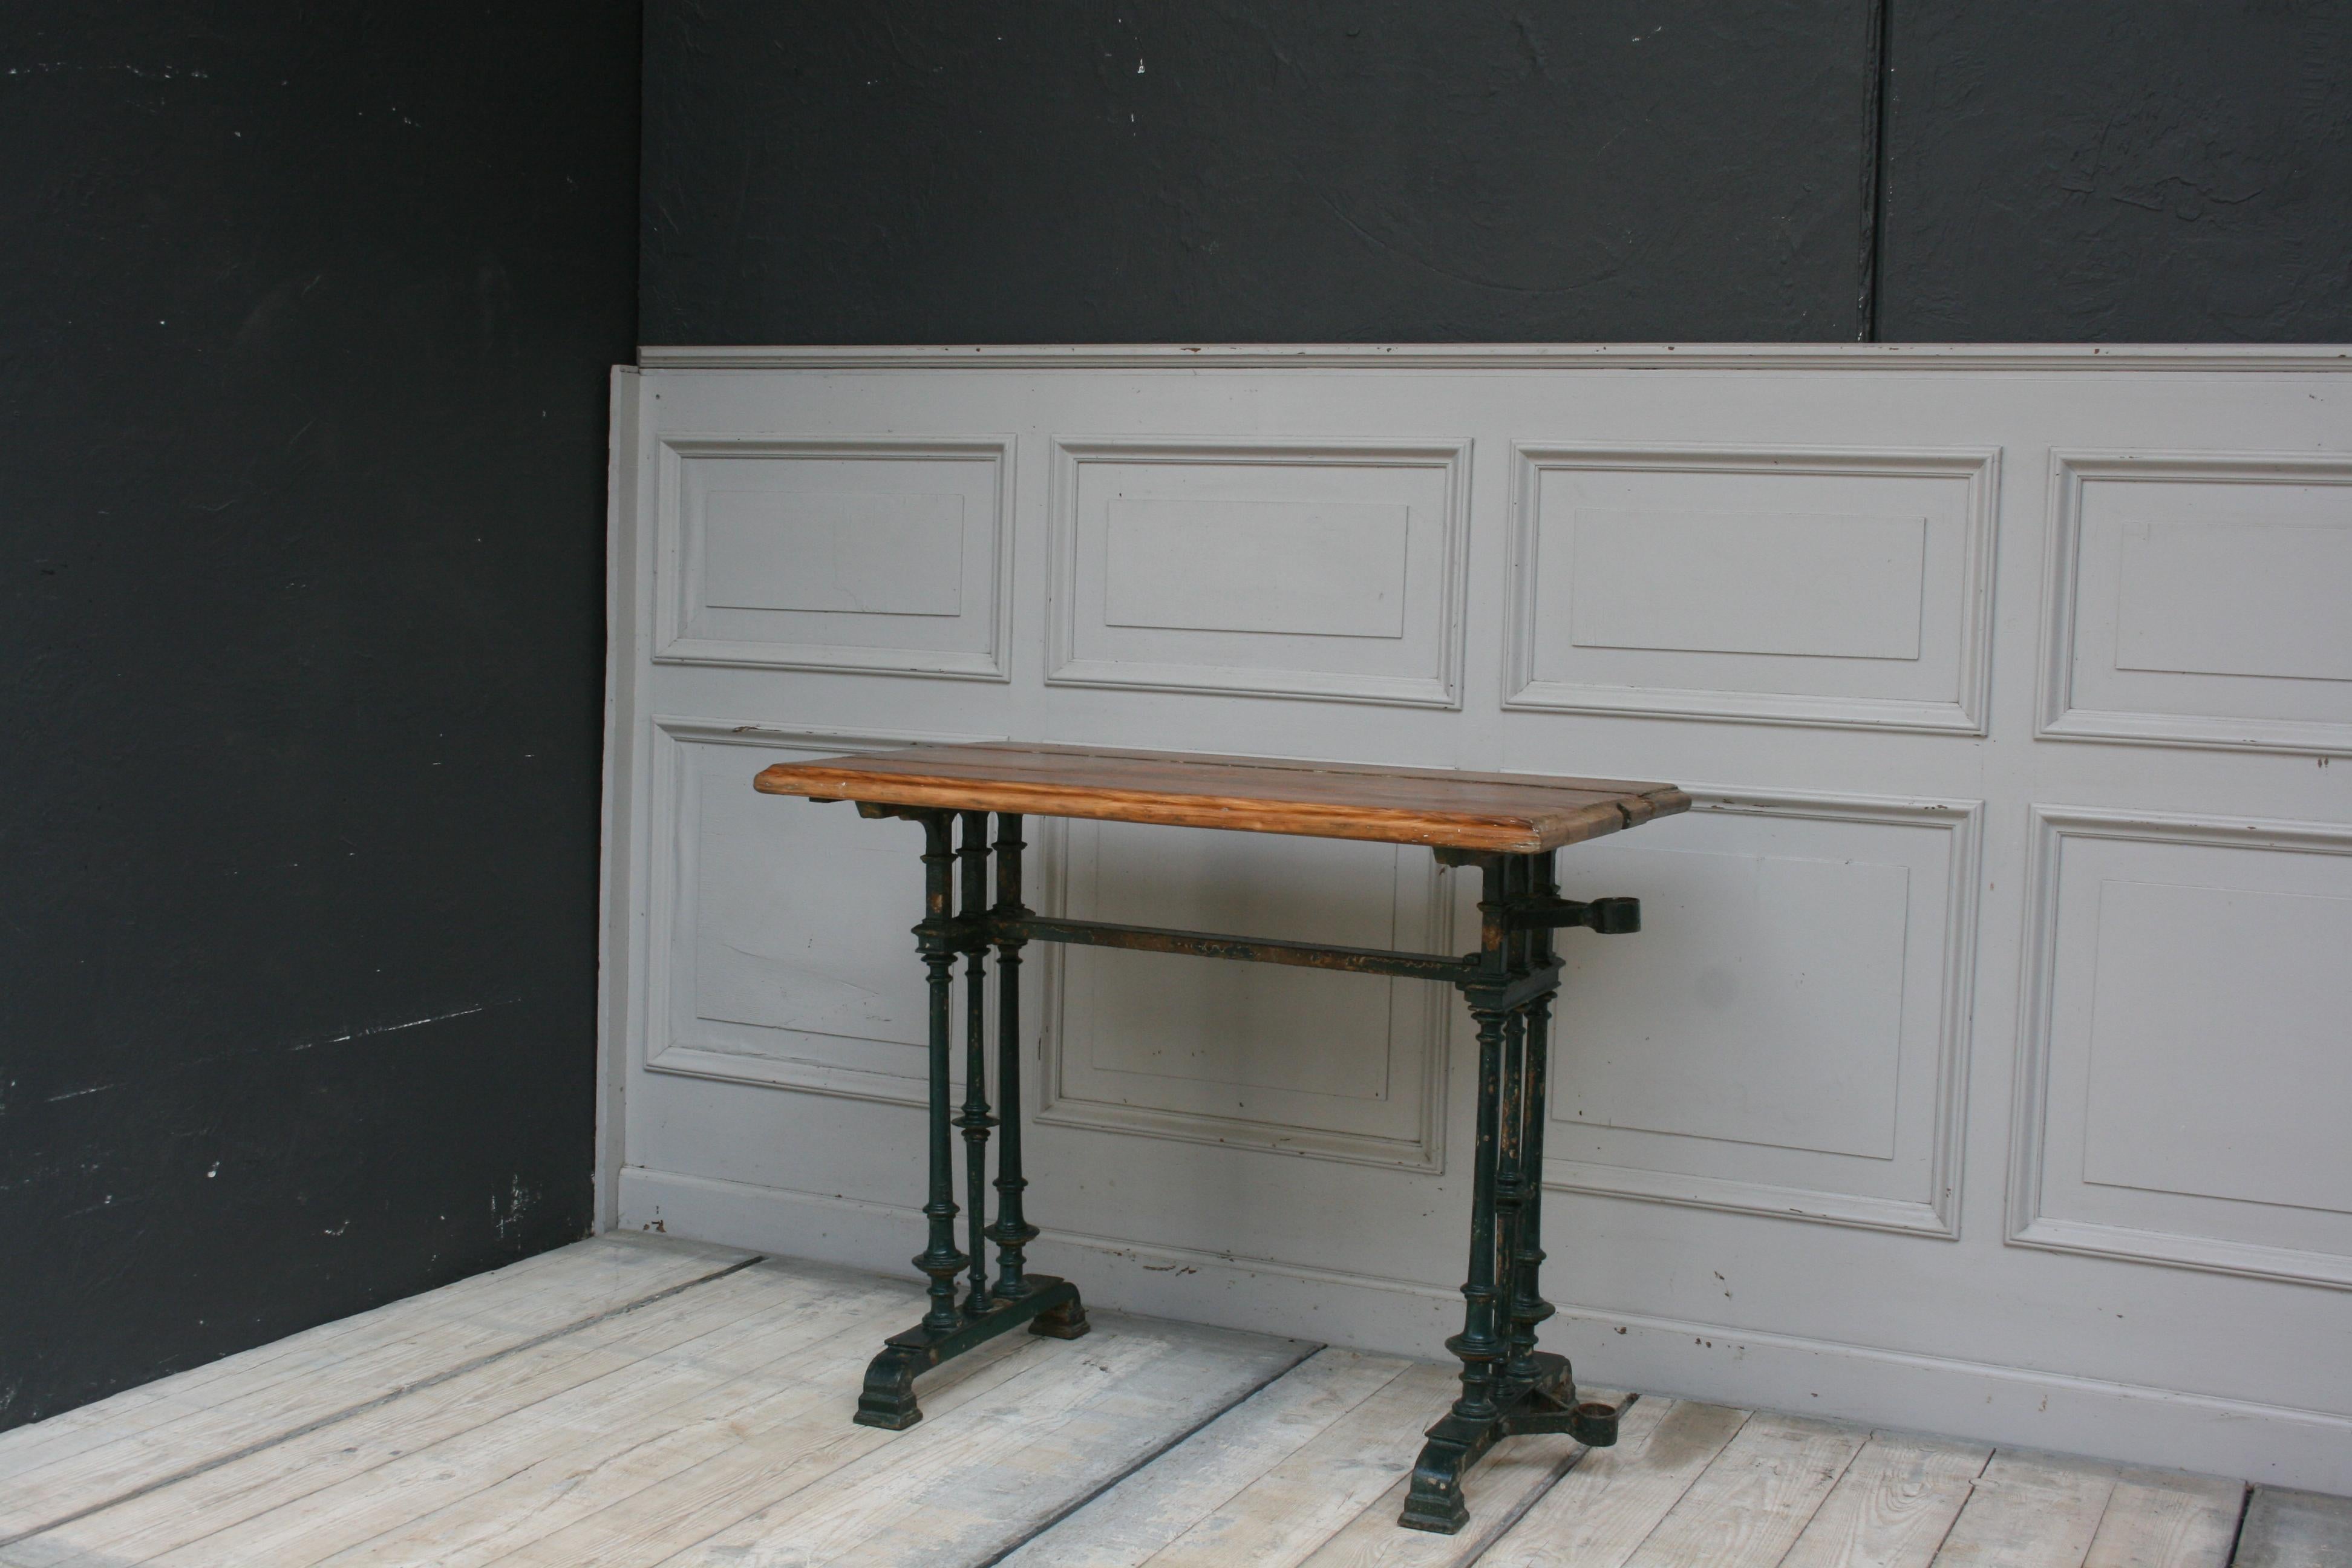 Beautiful 19th century table with cast-iron frame in original paint. The table has a wonderful patina and probably comes from the outside of a bistro in France and has a practical holder for the parasol on the side of the iron frame.
The wood panel